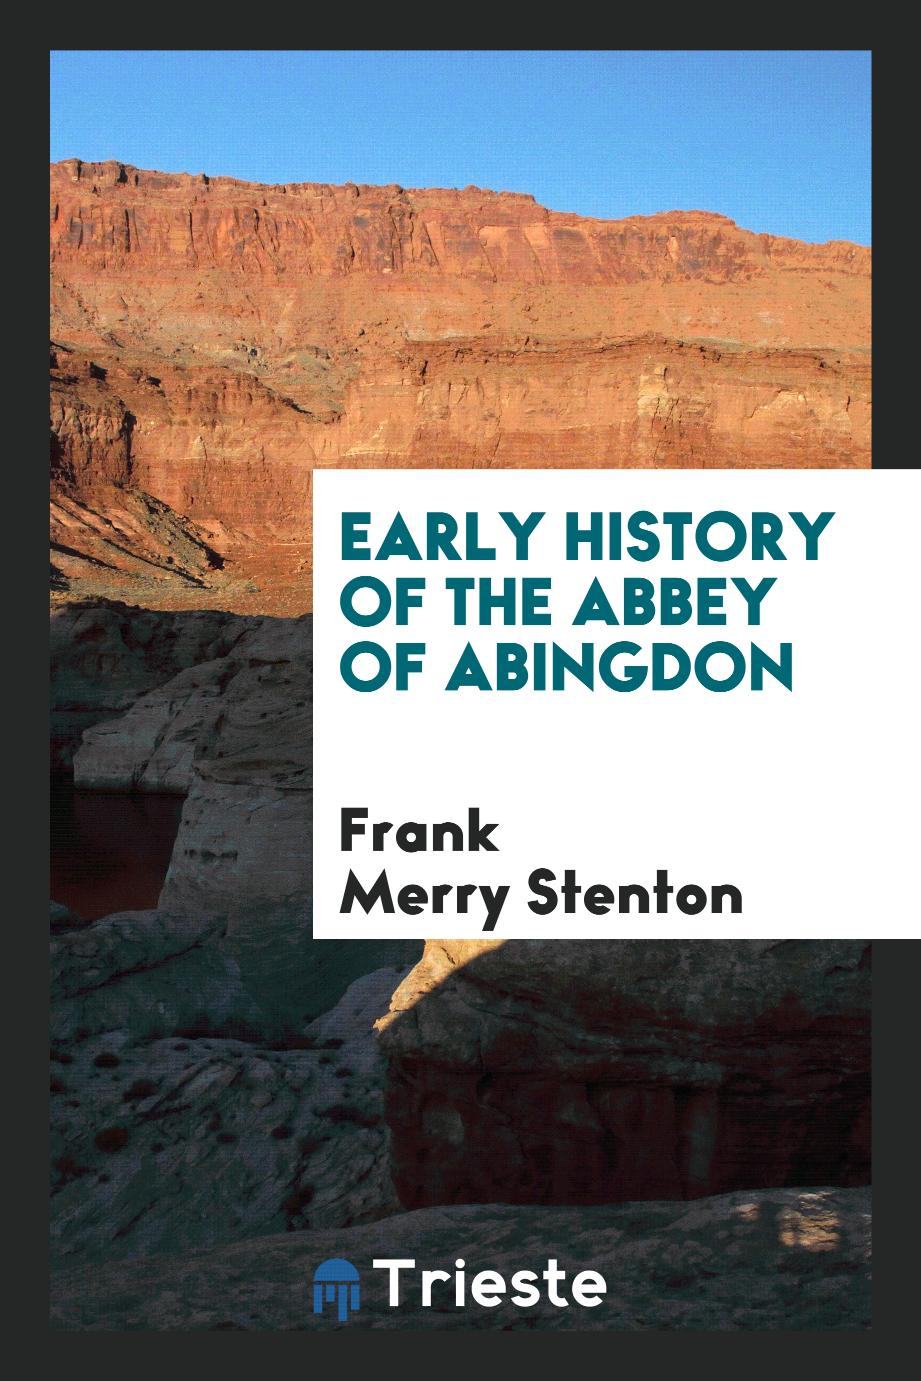 Early history of the abbey of Abingdon